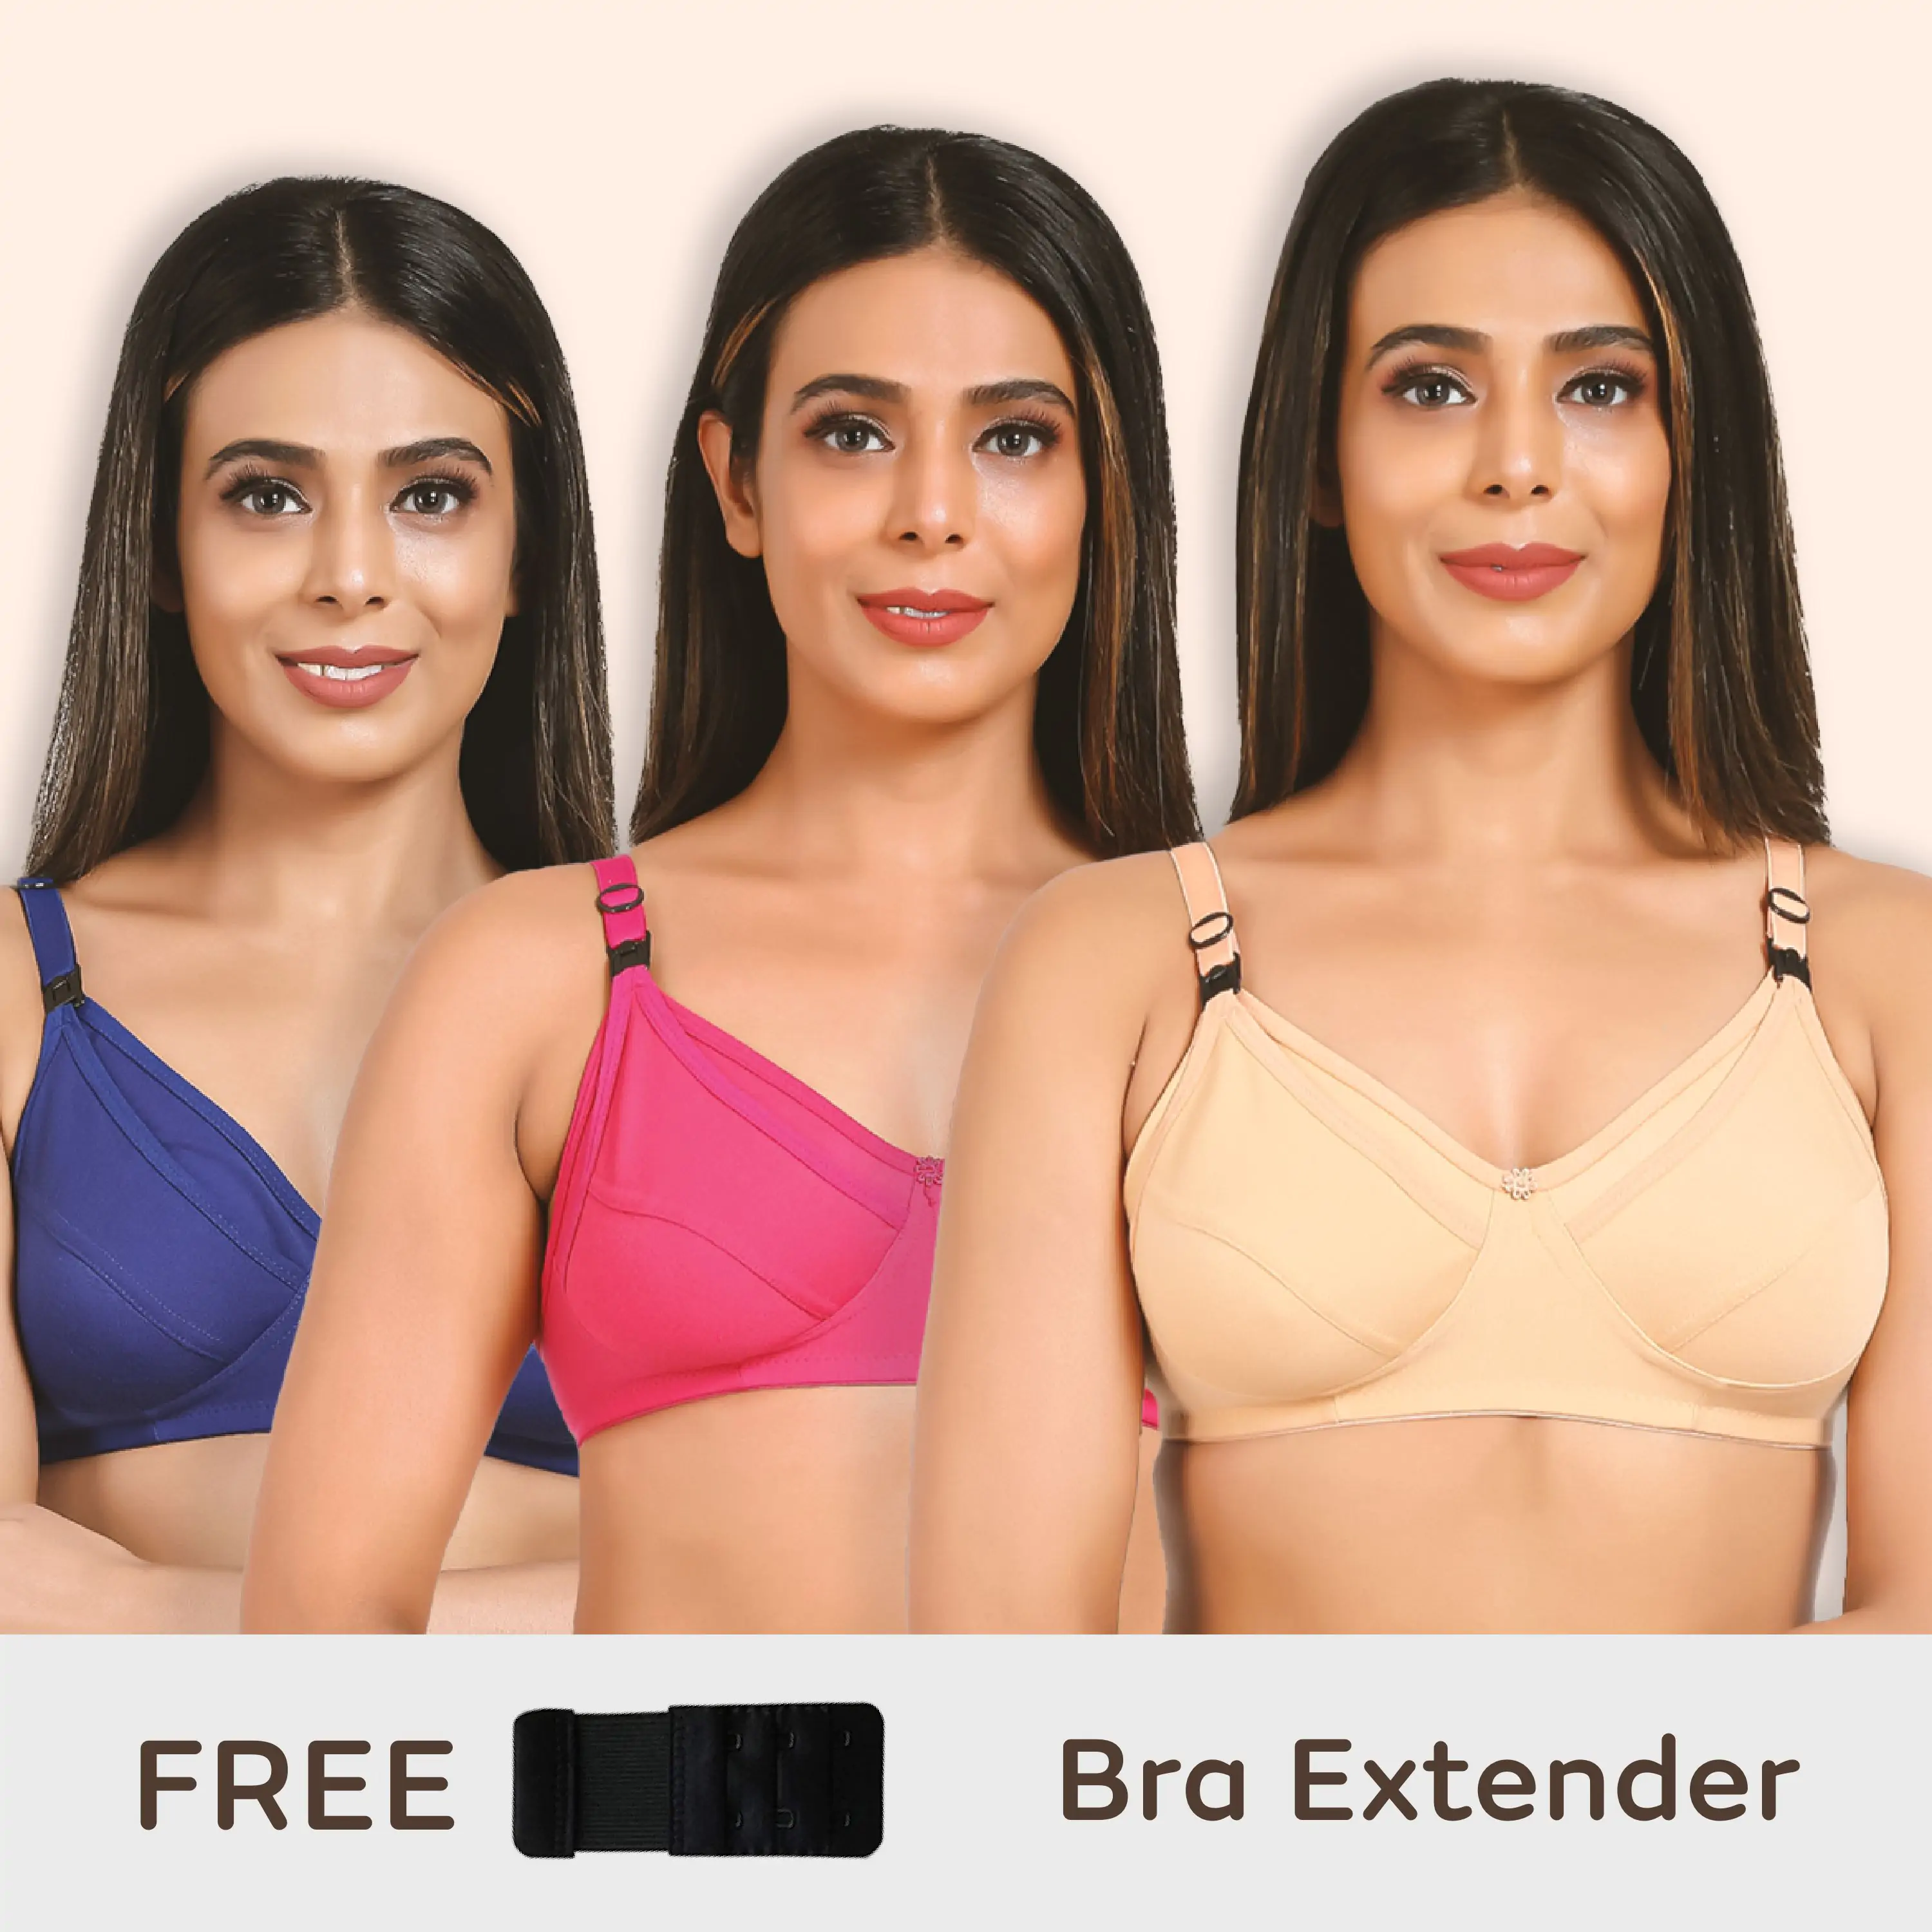 Maternity/Nursing Bras Non-Wired, Non-Padded - Pack of 3 with free Bra Extender (Sandalwood, Persian Blue & Dark pink) 30 B